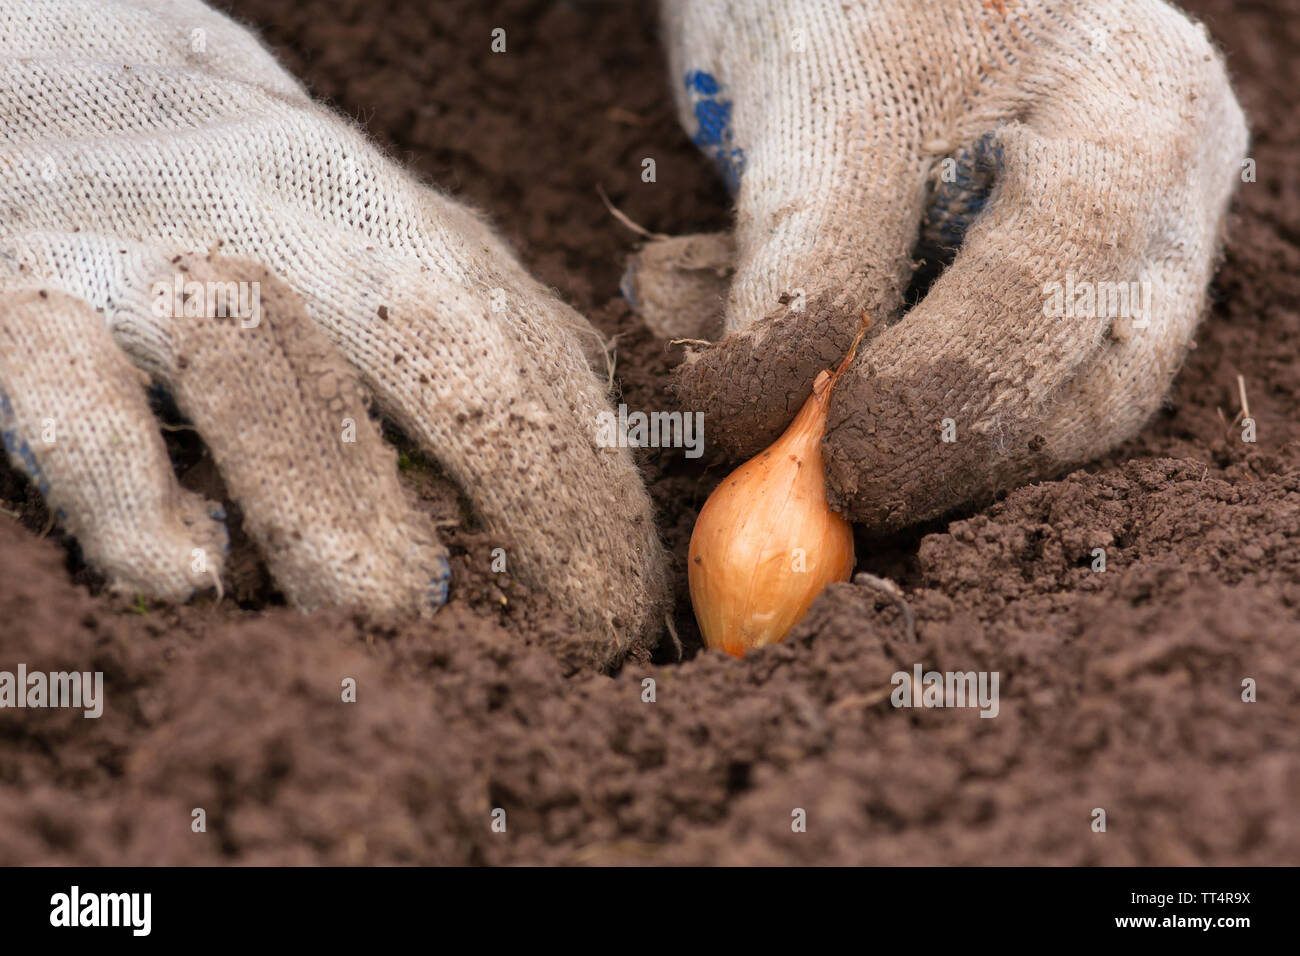 hands in gloves planting onion in the vegetable garden Stock Photo